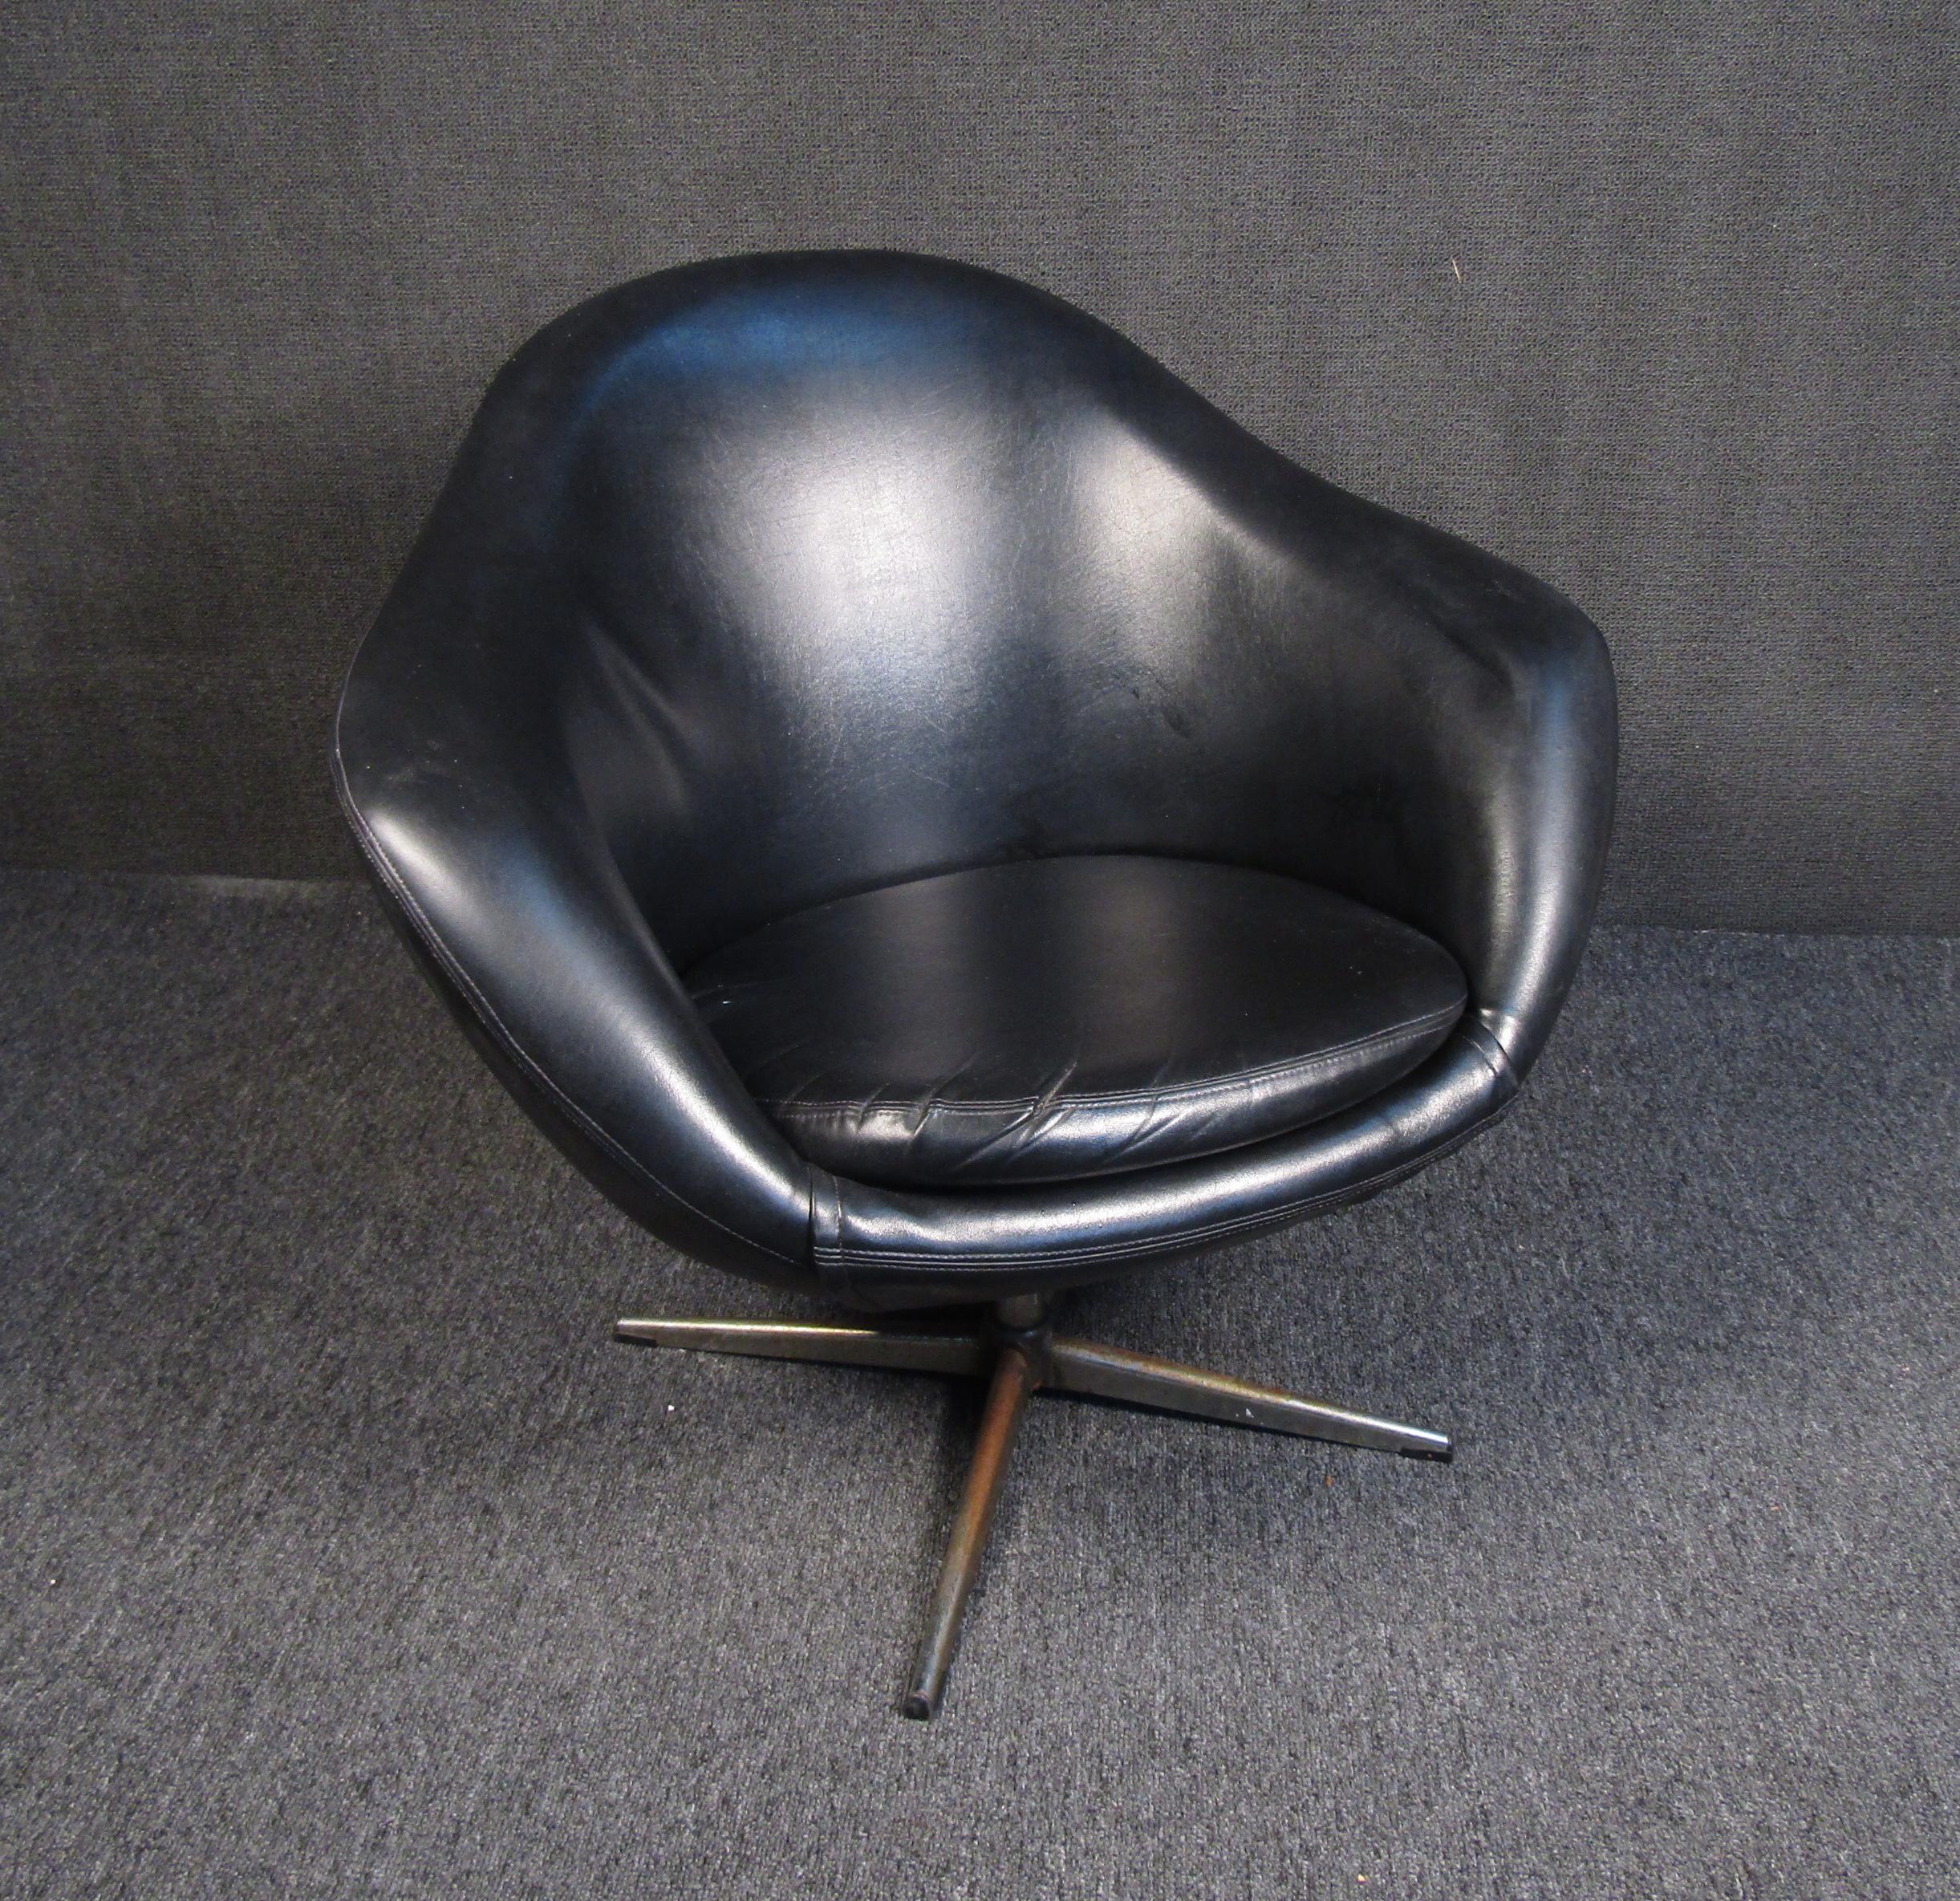 A Mid-Century Modern black lounge chair that is both comfortable and elegant. This vintage chair's rounded design allows one to sink in comfortably while being held up by a swiveling chrome base. Please confirm item's location with seller (NY or NJ)